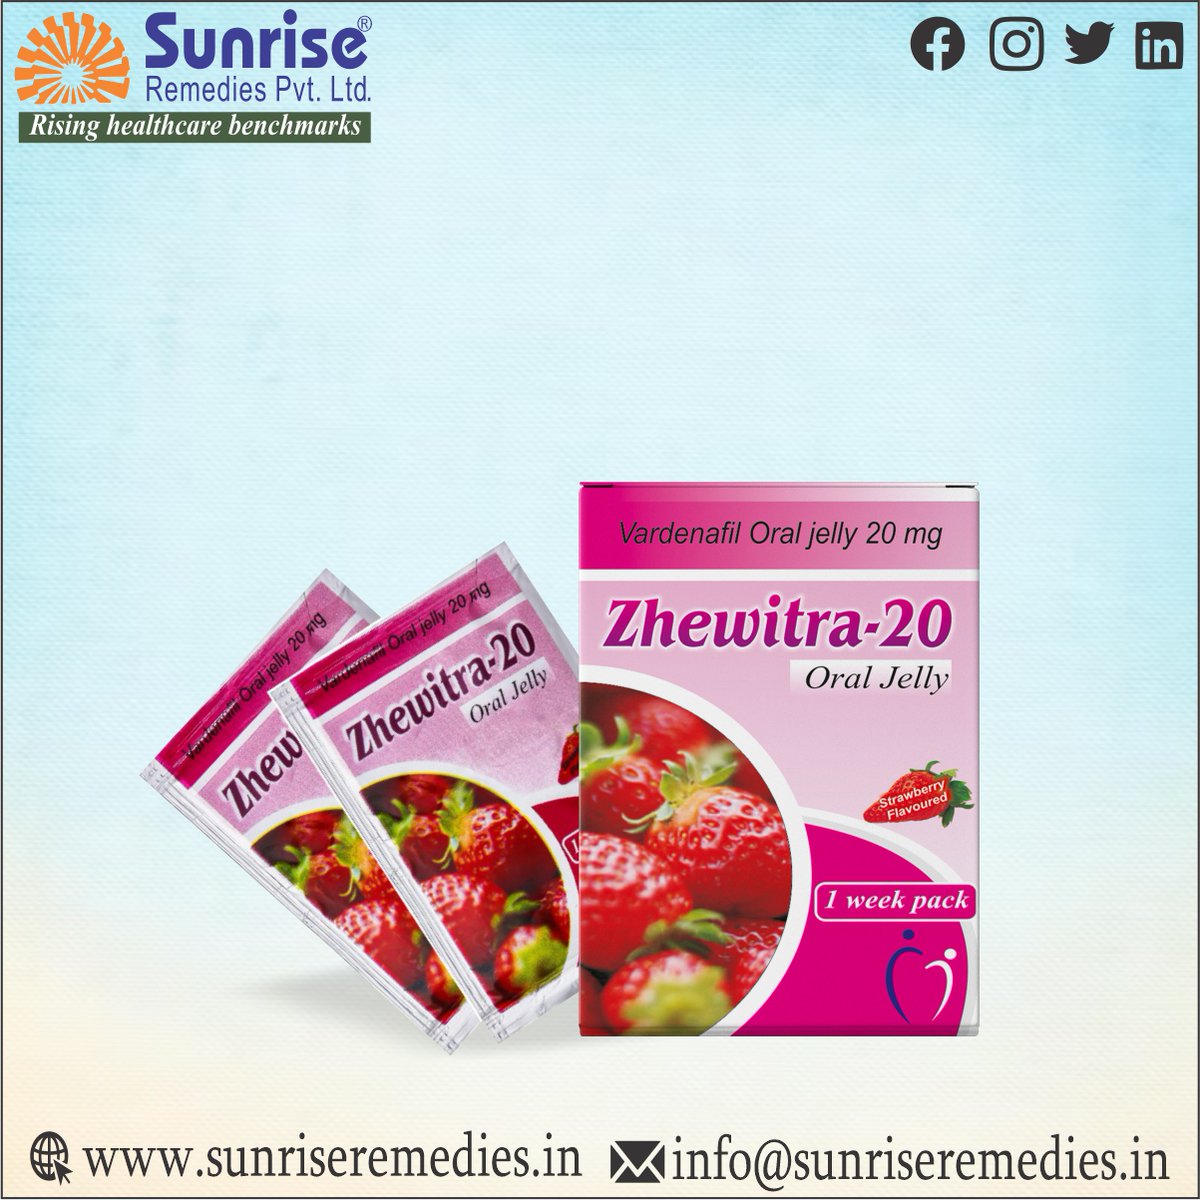 A Perfect Life is a Happy Life With #ZhewitraOraljelly Contains Vardenafil Oral Jelly.

Read More: sunriseremedies.in/our-products/z…

#VardenafilOralJelly #TadalafilOralJelly #SildenafilOraljelly #SildenafilEffervescent #Tadalafileffervescent #SildenafilChewable #TadalafilChewable #Sunrise